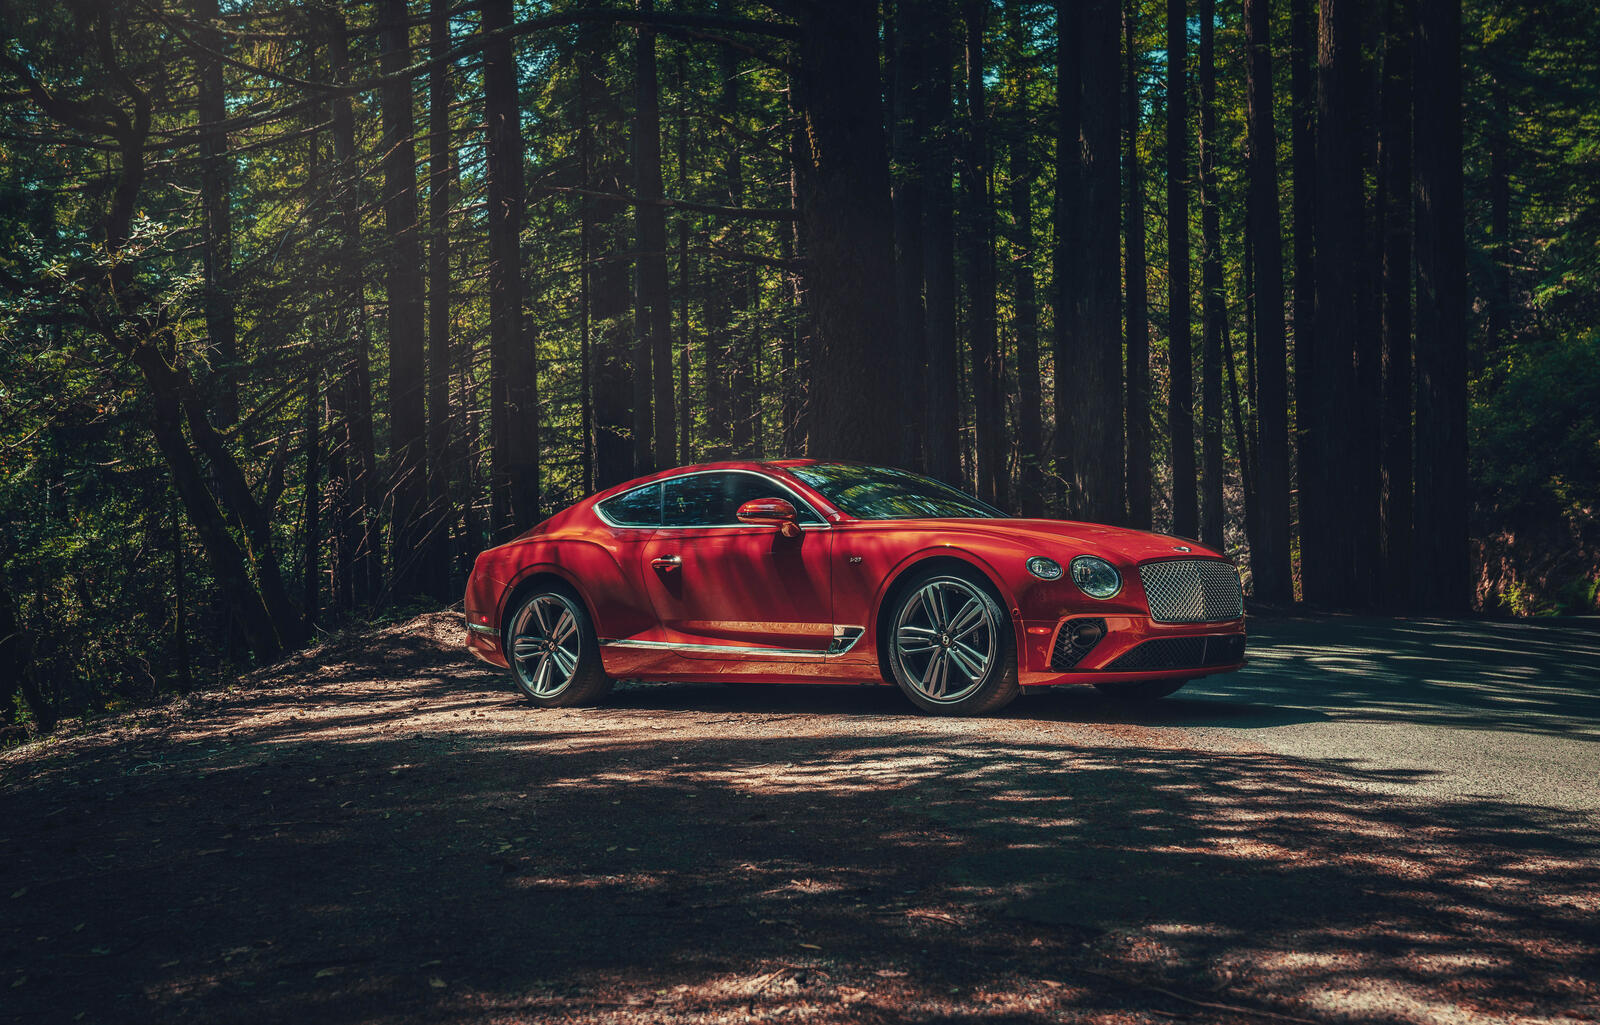 Free photo The 2020 Bentley Continental GT in red among the conifers